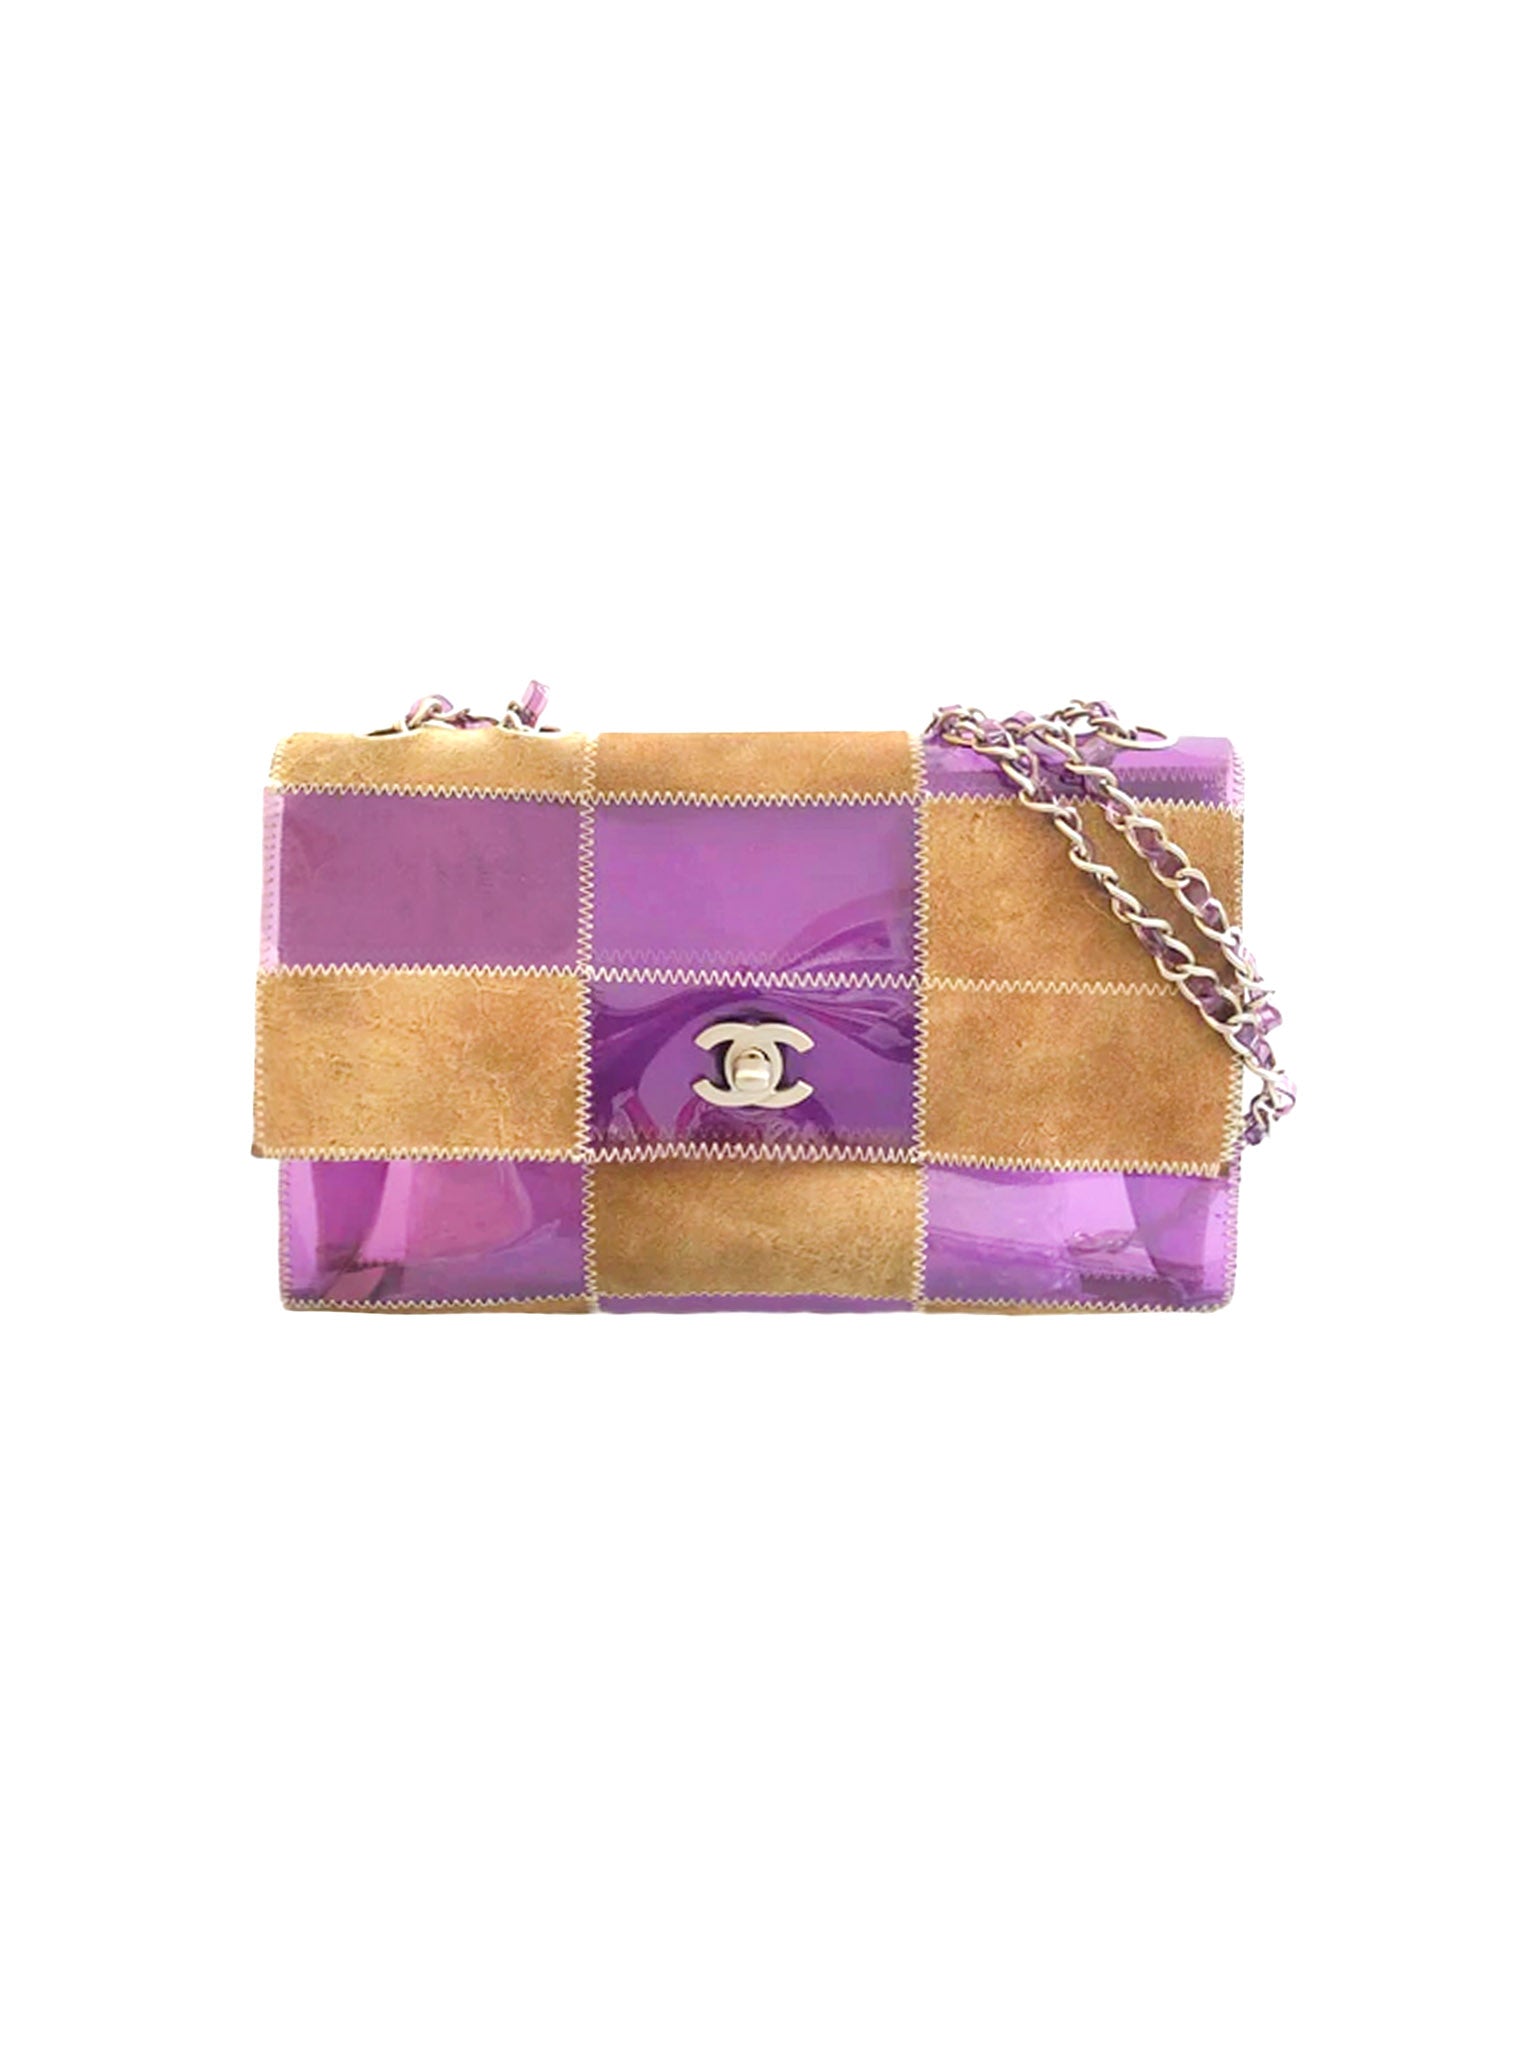 Chanel 2000s Brown and Purple Vinyl Flap Bag